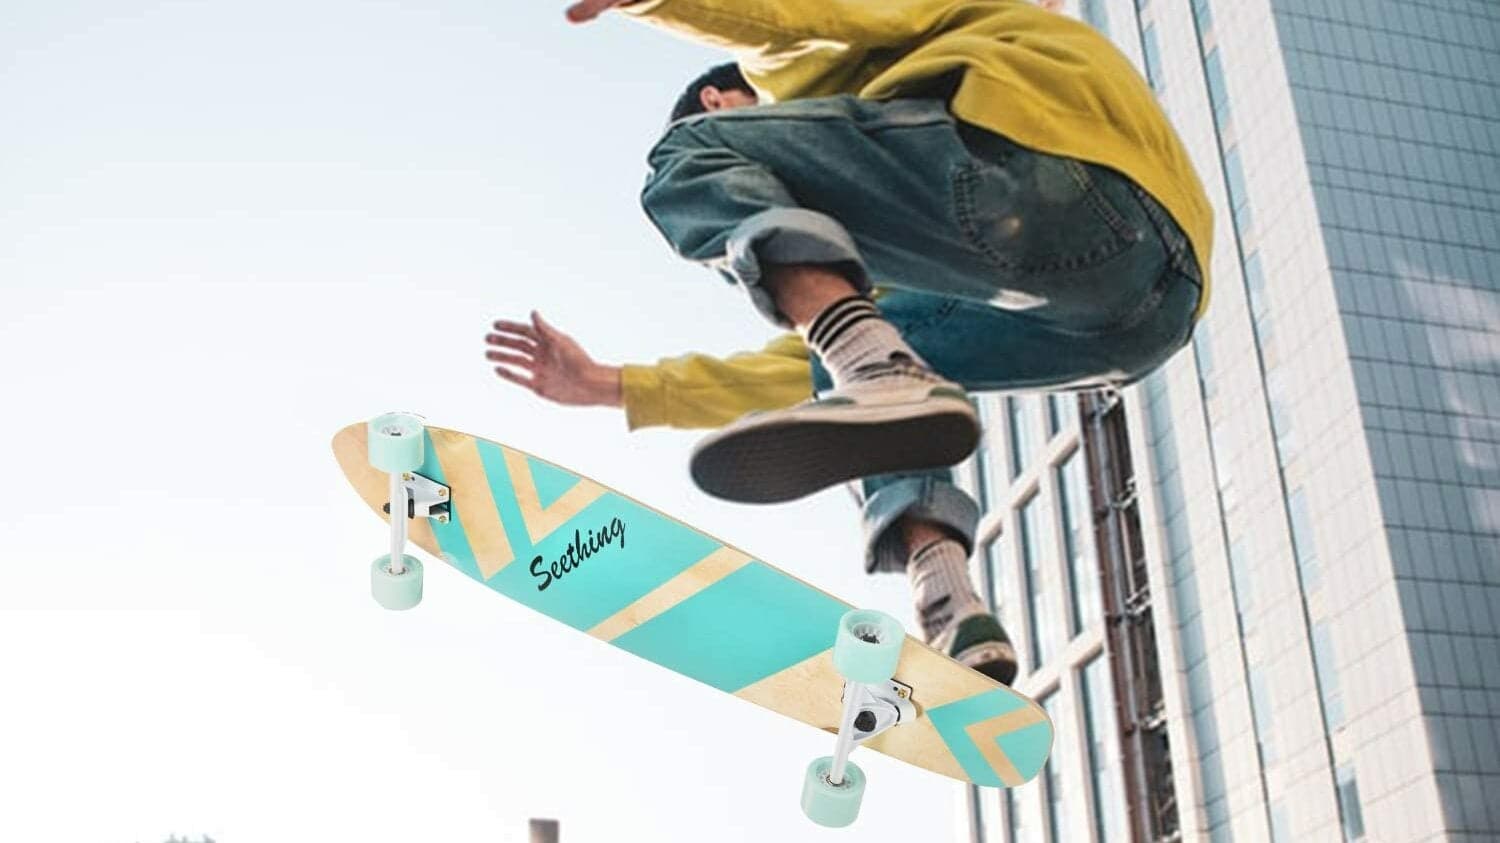 The Best Longboards For Commuting (Review & Buying Guide) in 2022